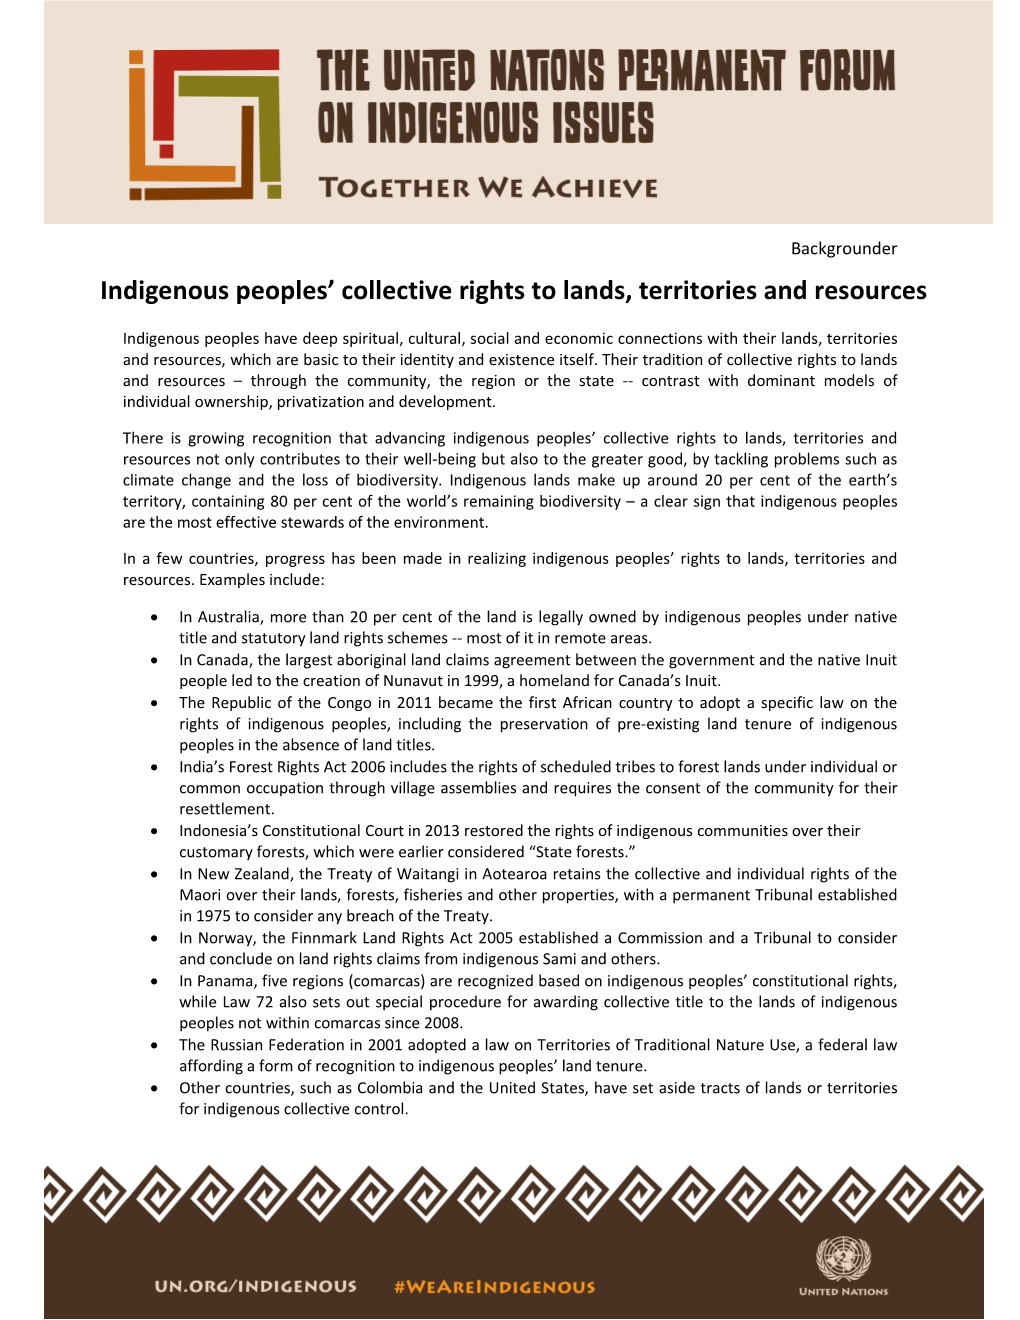 Indigenous Peoples' Collective Rights to Lands, Territories and Resources